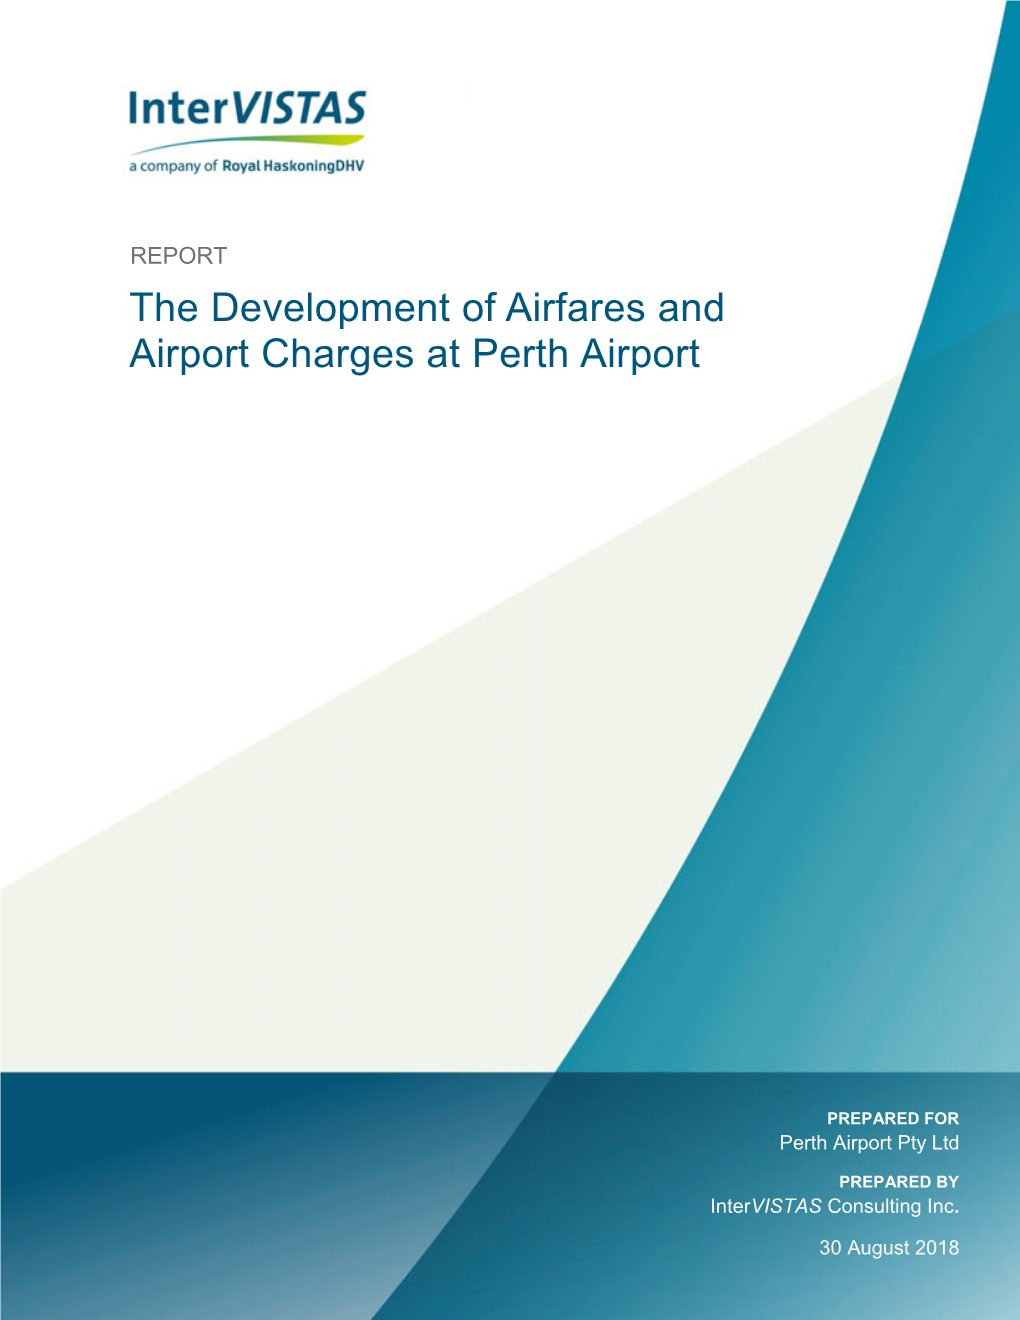 The Development of Airfares and Airport Charges at Perth Airport